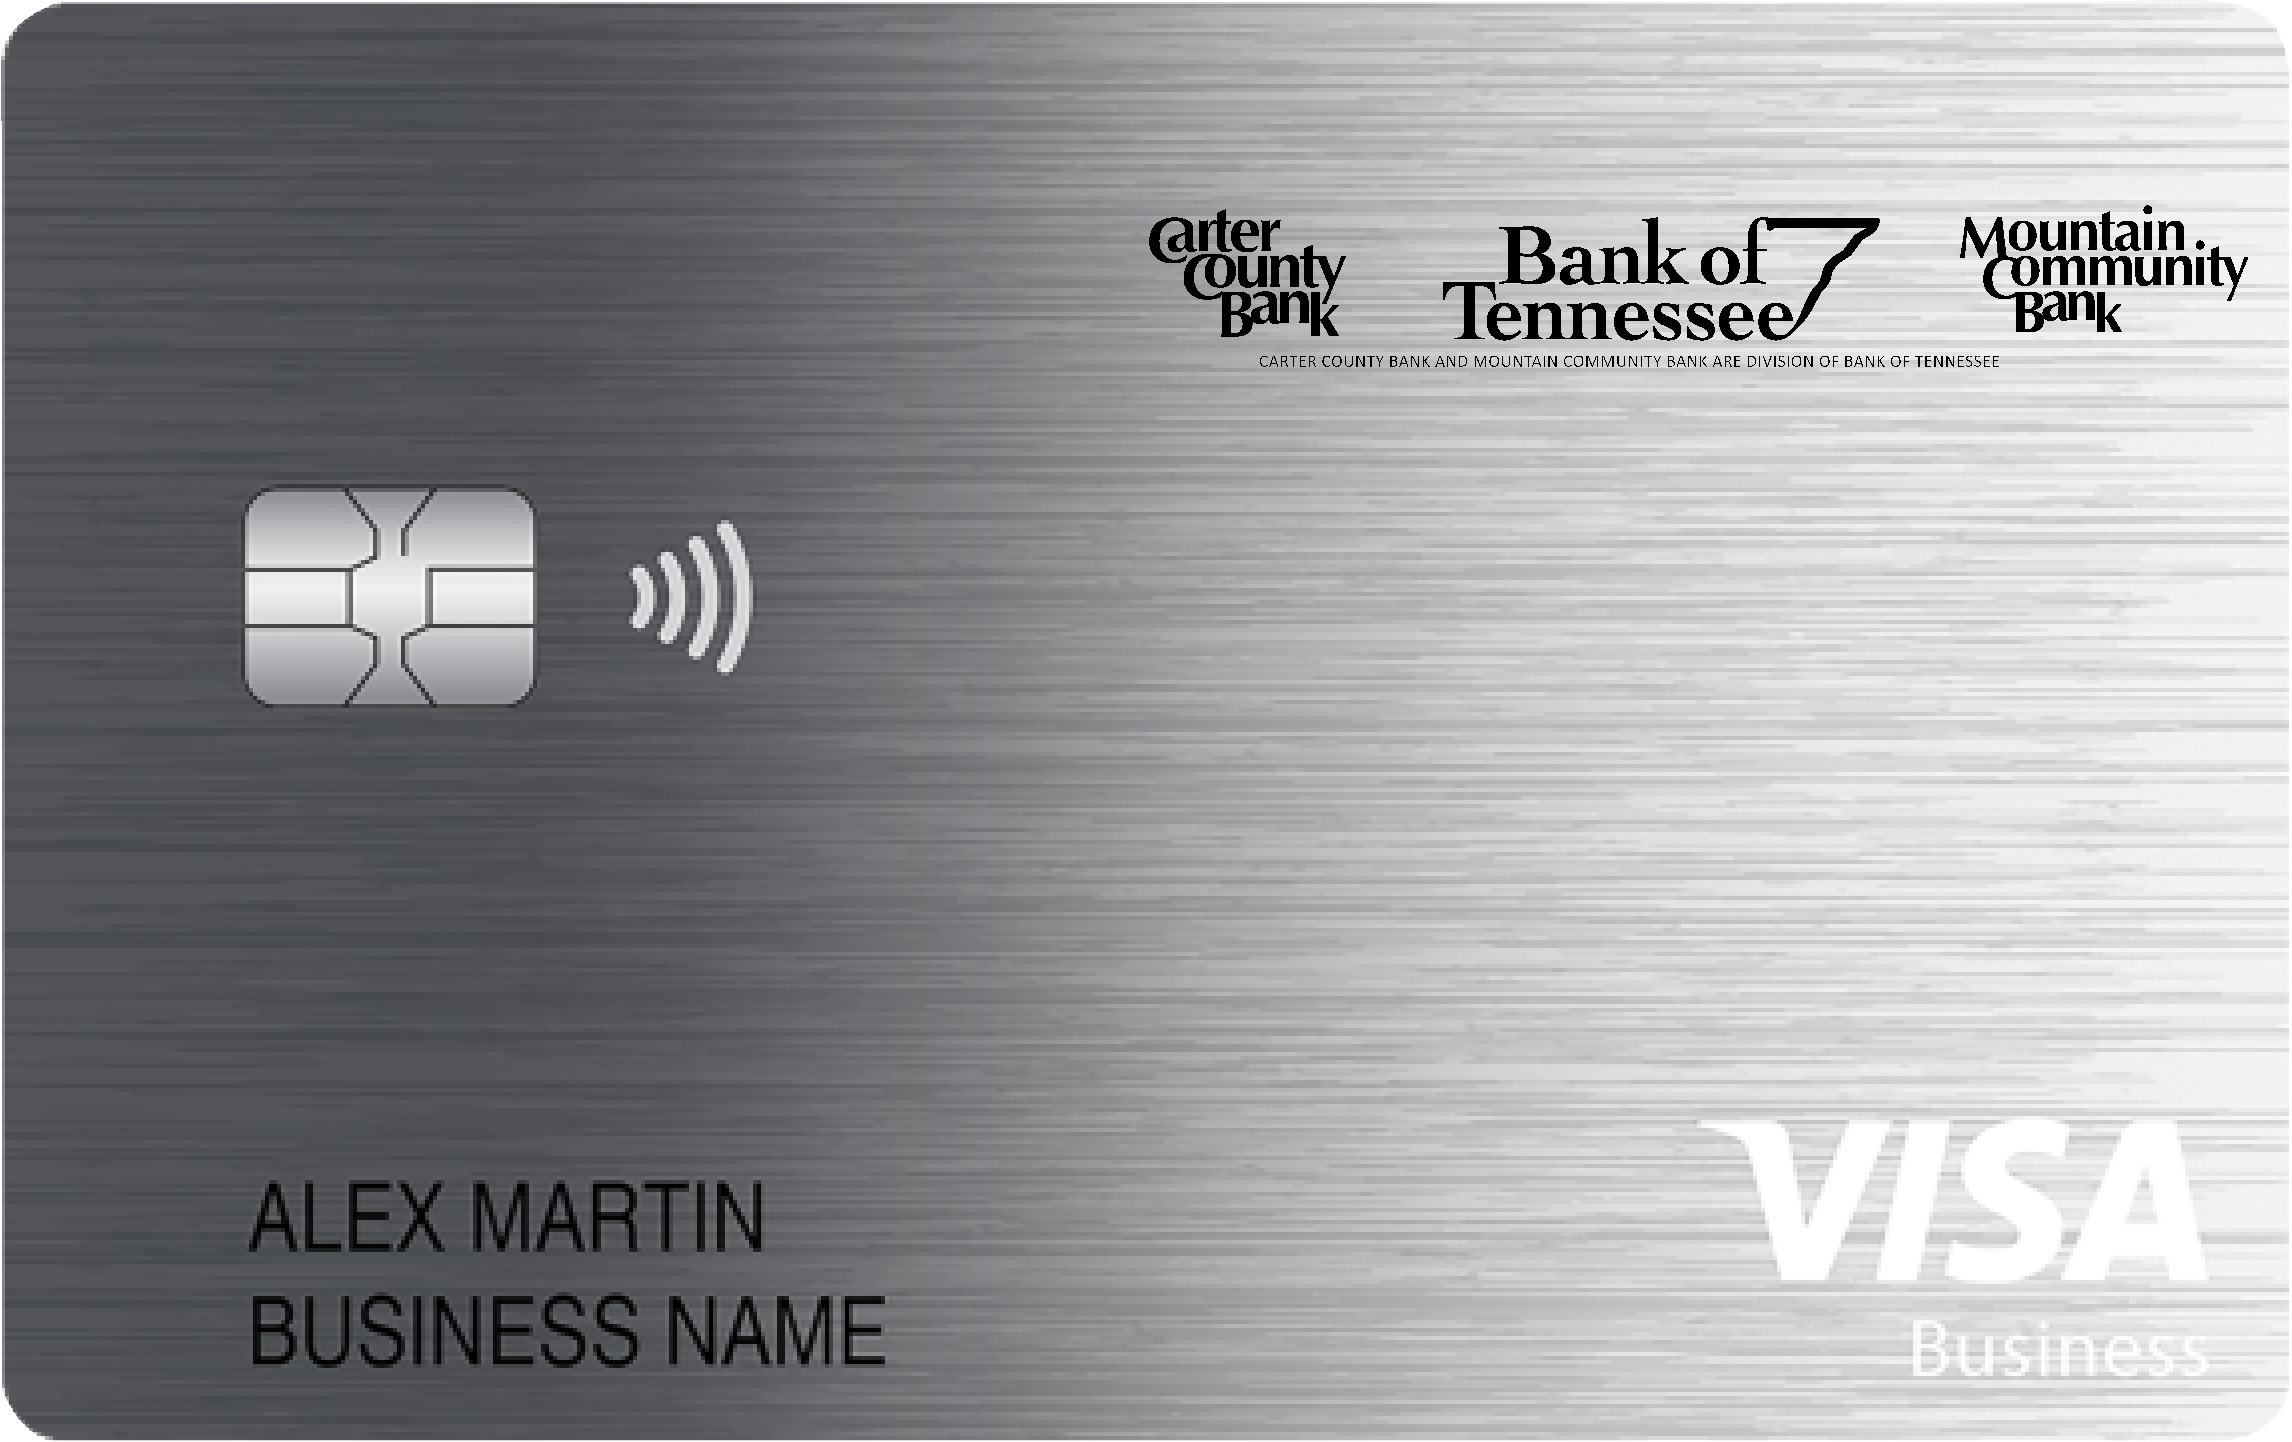 Bank of Tennessee Business Card Card